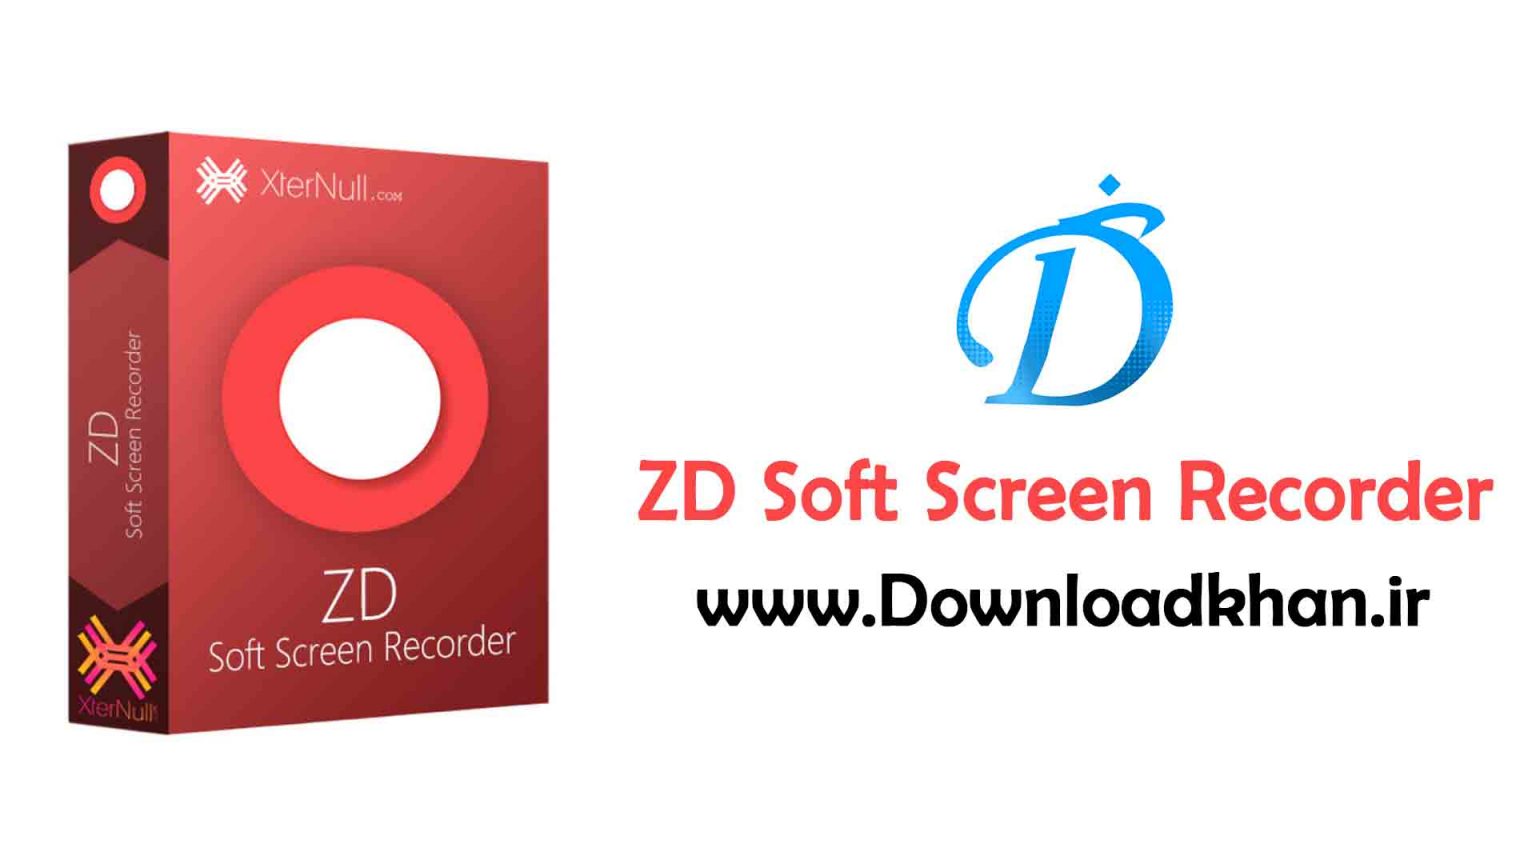 ZD Soft Screen Recorder 11.6.7 for android download